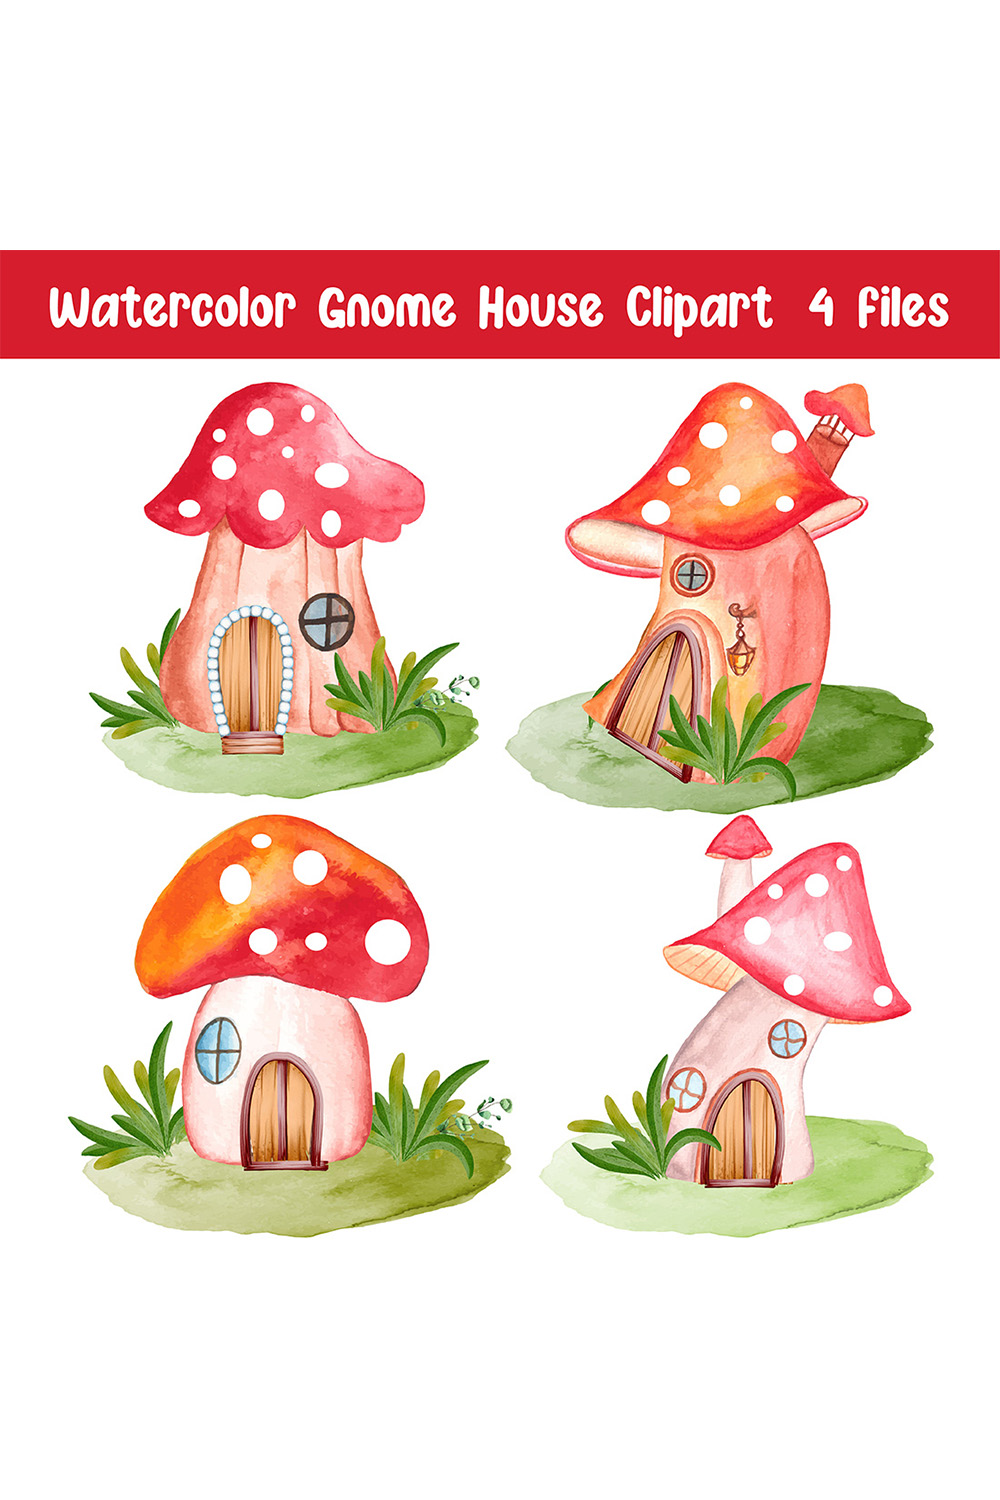 Collection of beautiful watercolor images of gnome houses